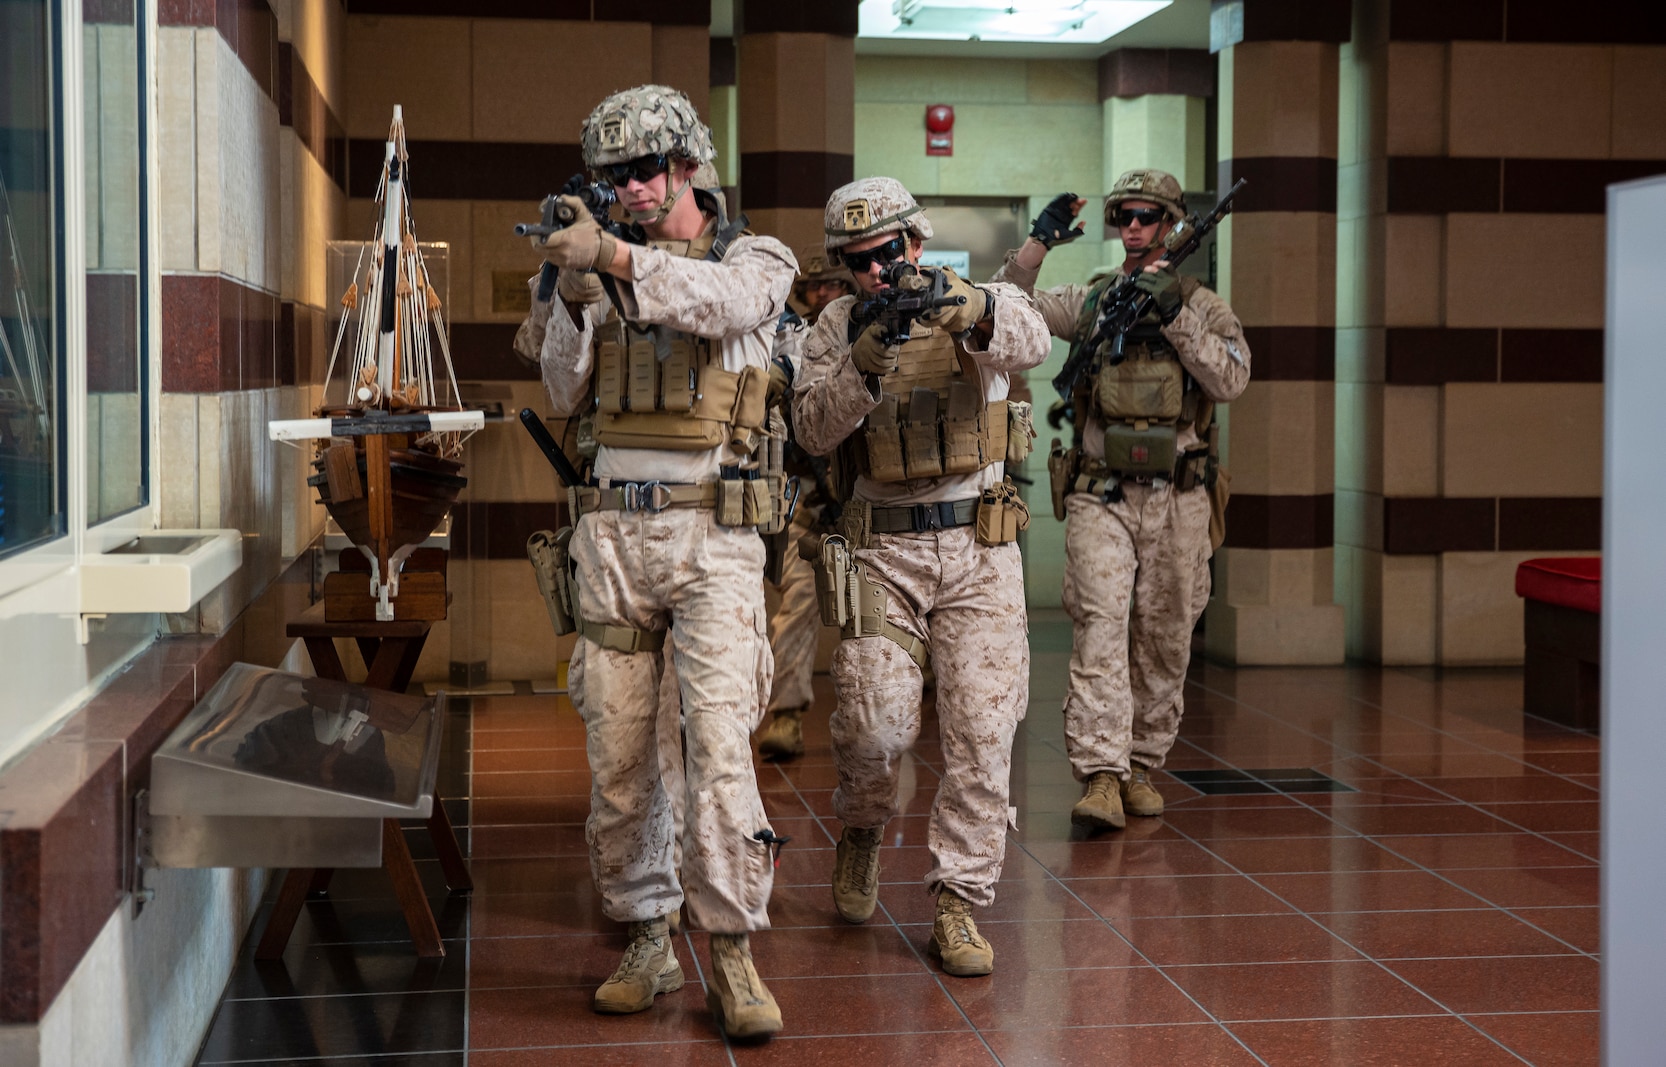 OMAN (February 24, 2023) – U.S. Marines assigned to Fleet Anti-Terrorism Security Team Central Command (FASTCENT)  conduct interior tactics during an embassy reinforcement drill in Muscat, Oman.